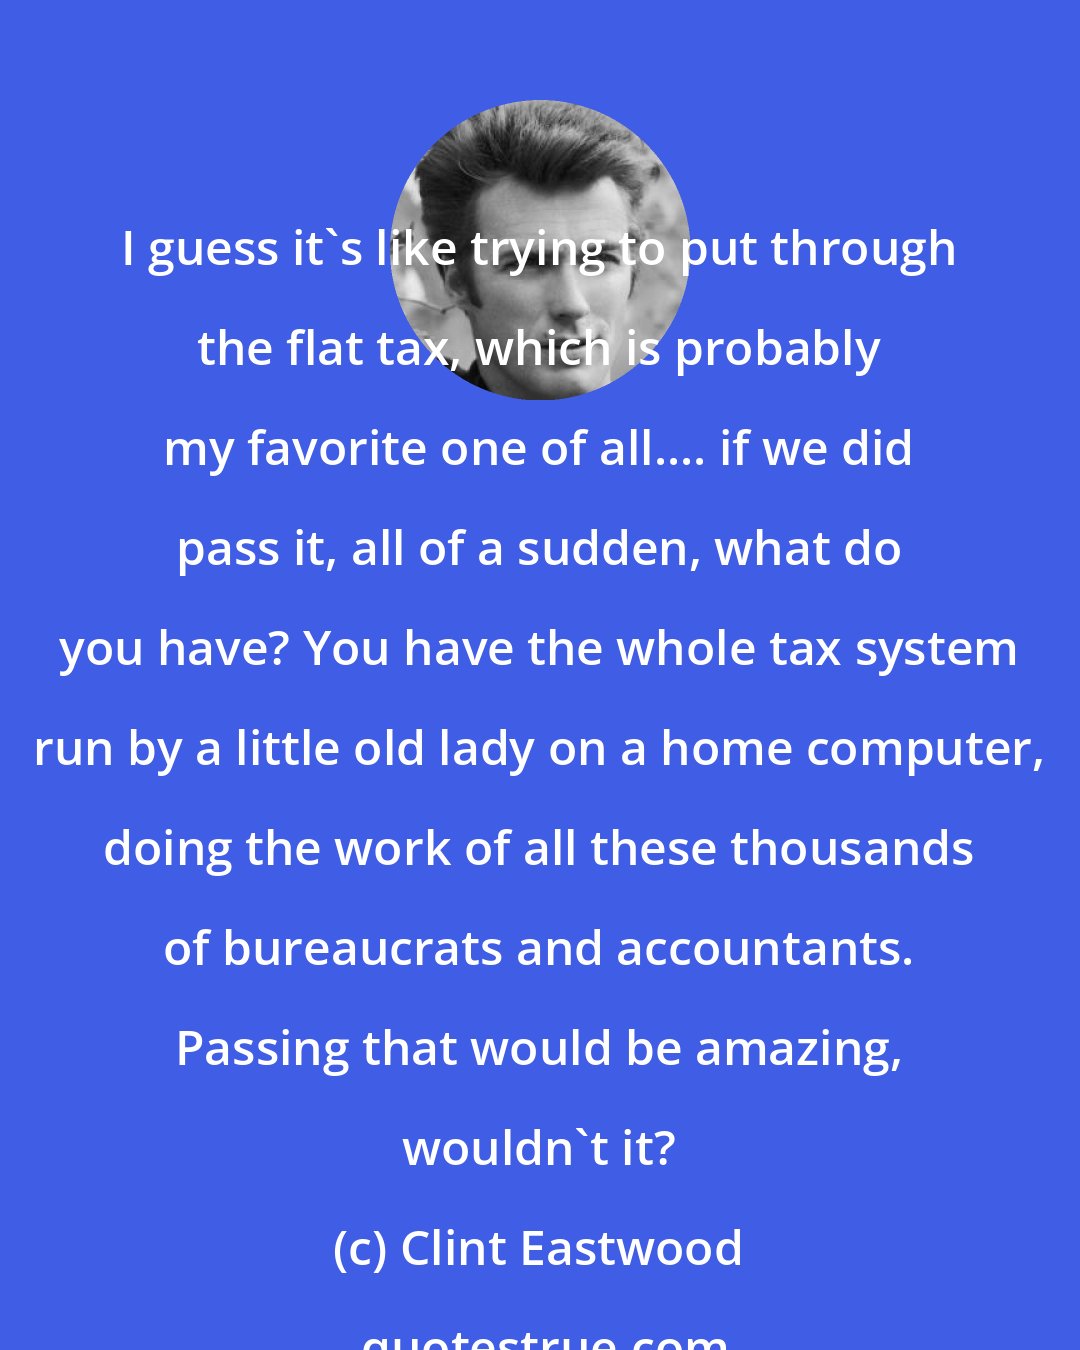 Clint Eastwood: I guess it's like trying to put through the flat tax, which is probably my favorite one of all.... if we did pass it, all of a sudden, what do you have? You have the whole tax system run by a little old lady on a home computer, doing the work of all these thousands of bureaucrats and accountants. Passing that would be amazing, wouldn't it?